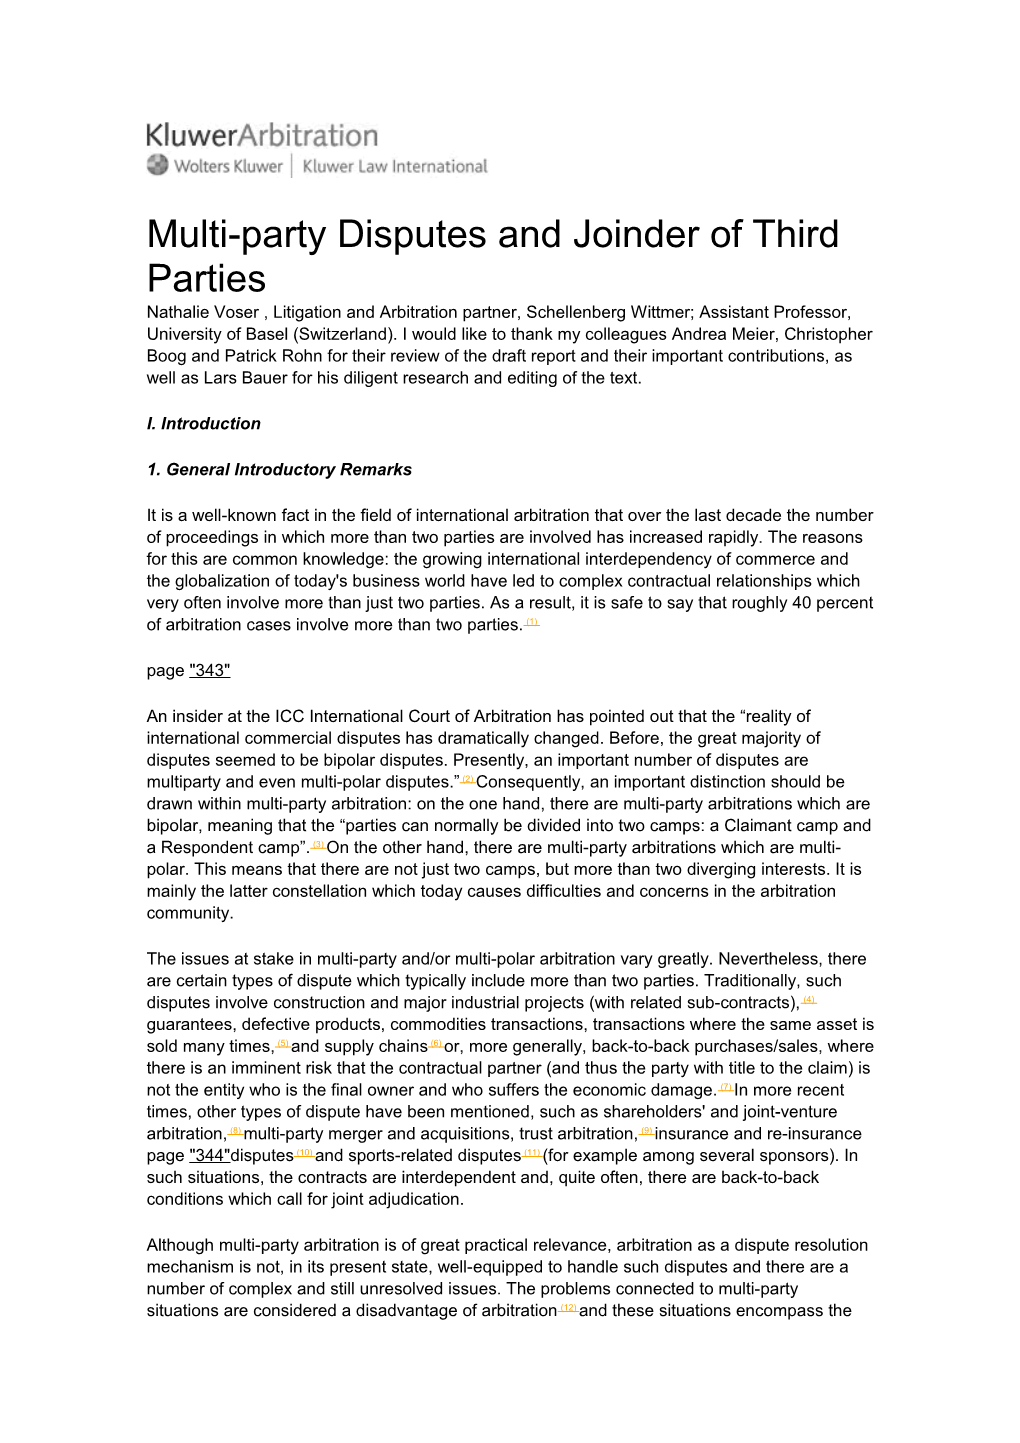 Multi-Party Disputes and Joinder of Third Parties